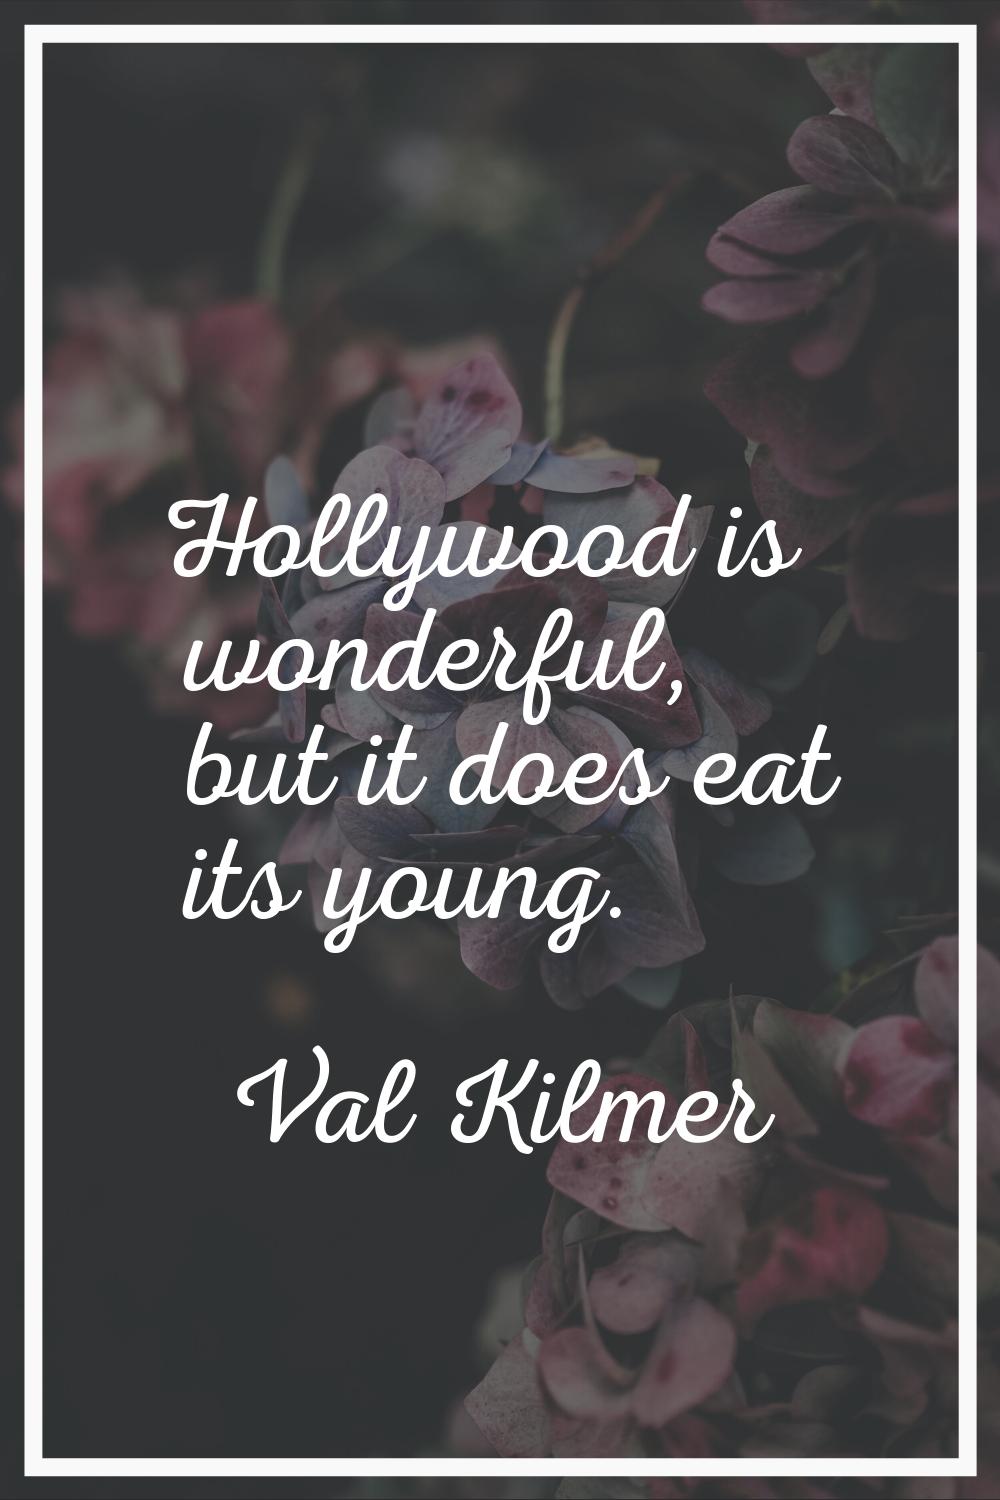 Hollywood is wonderful, but it does eat its young.